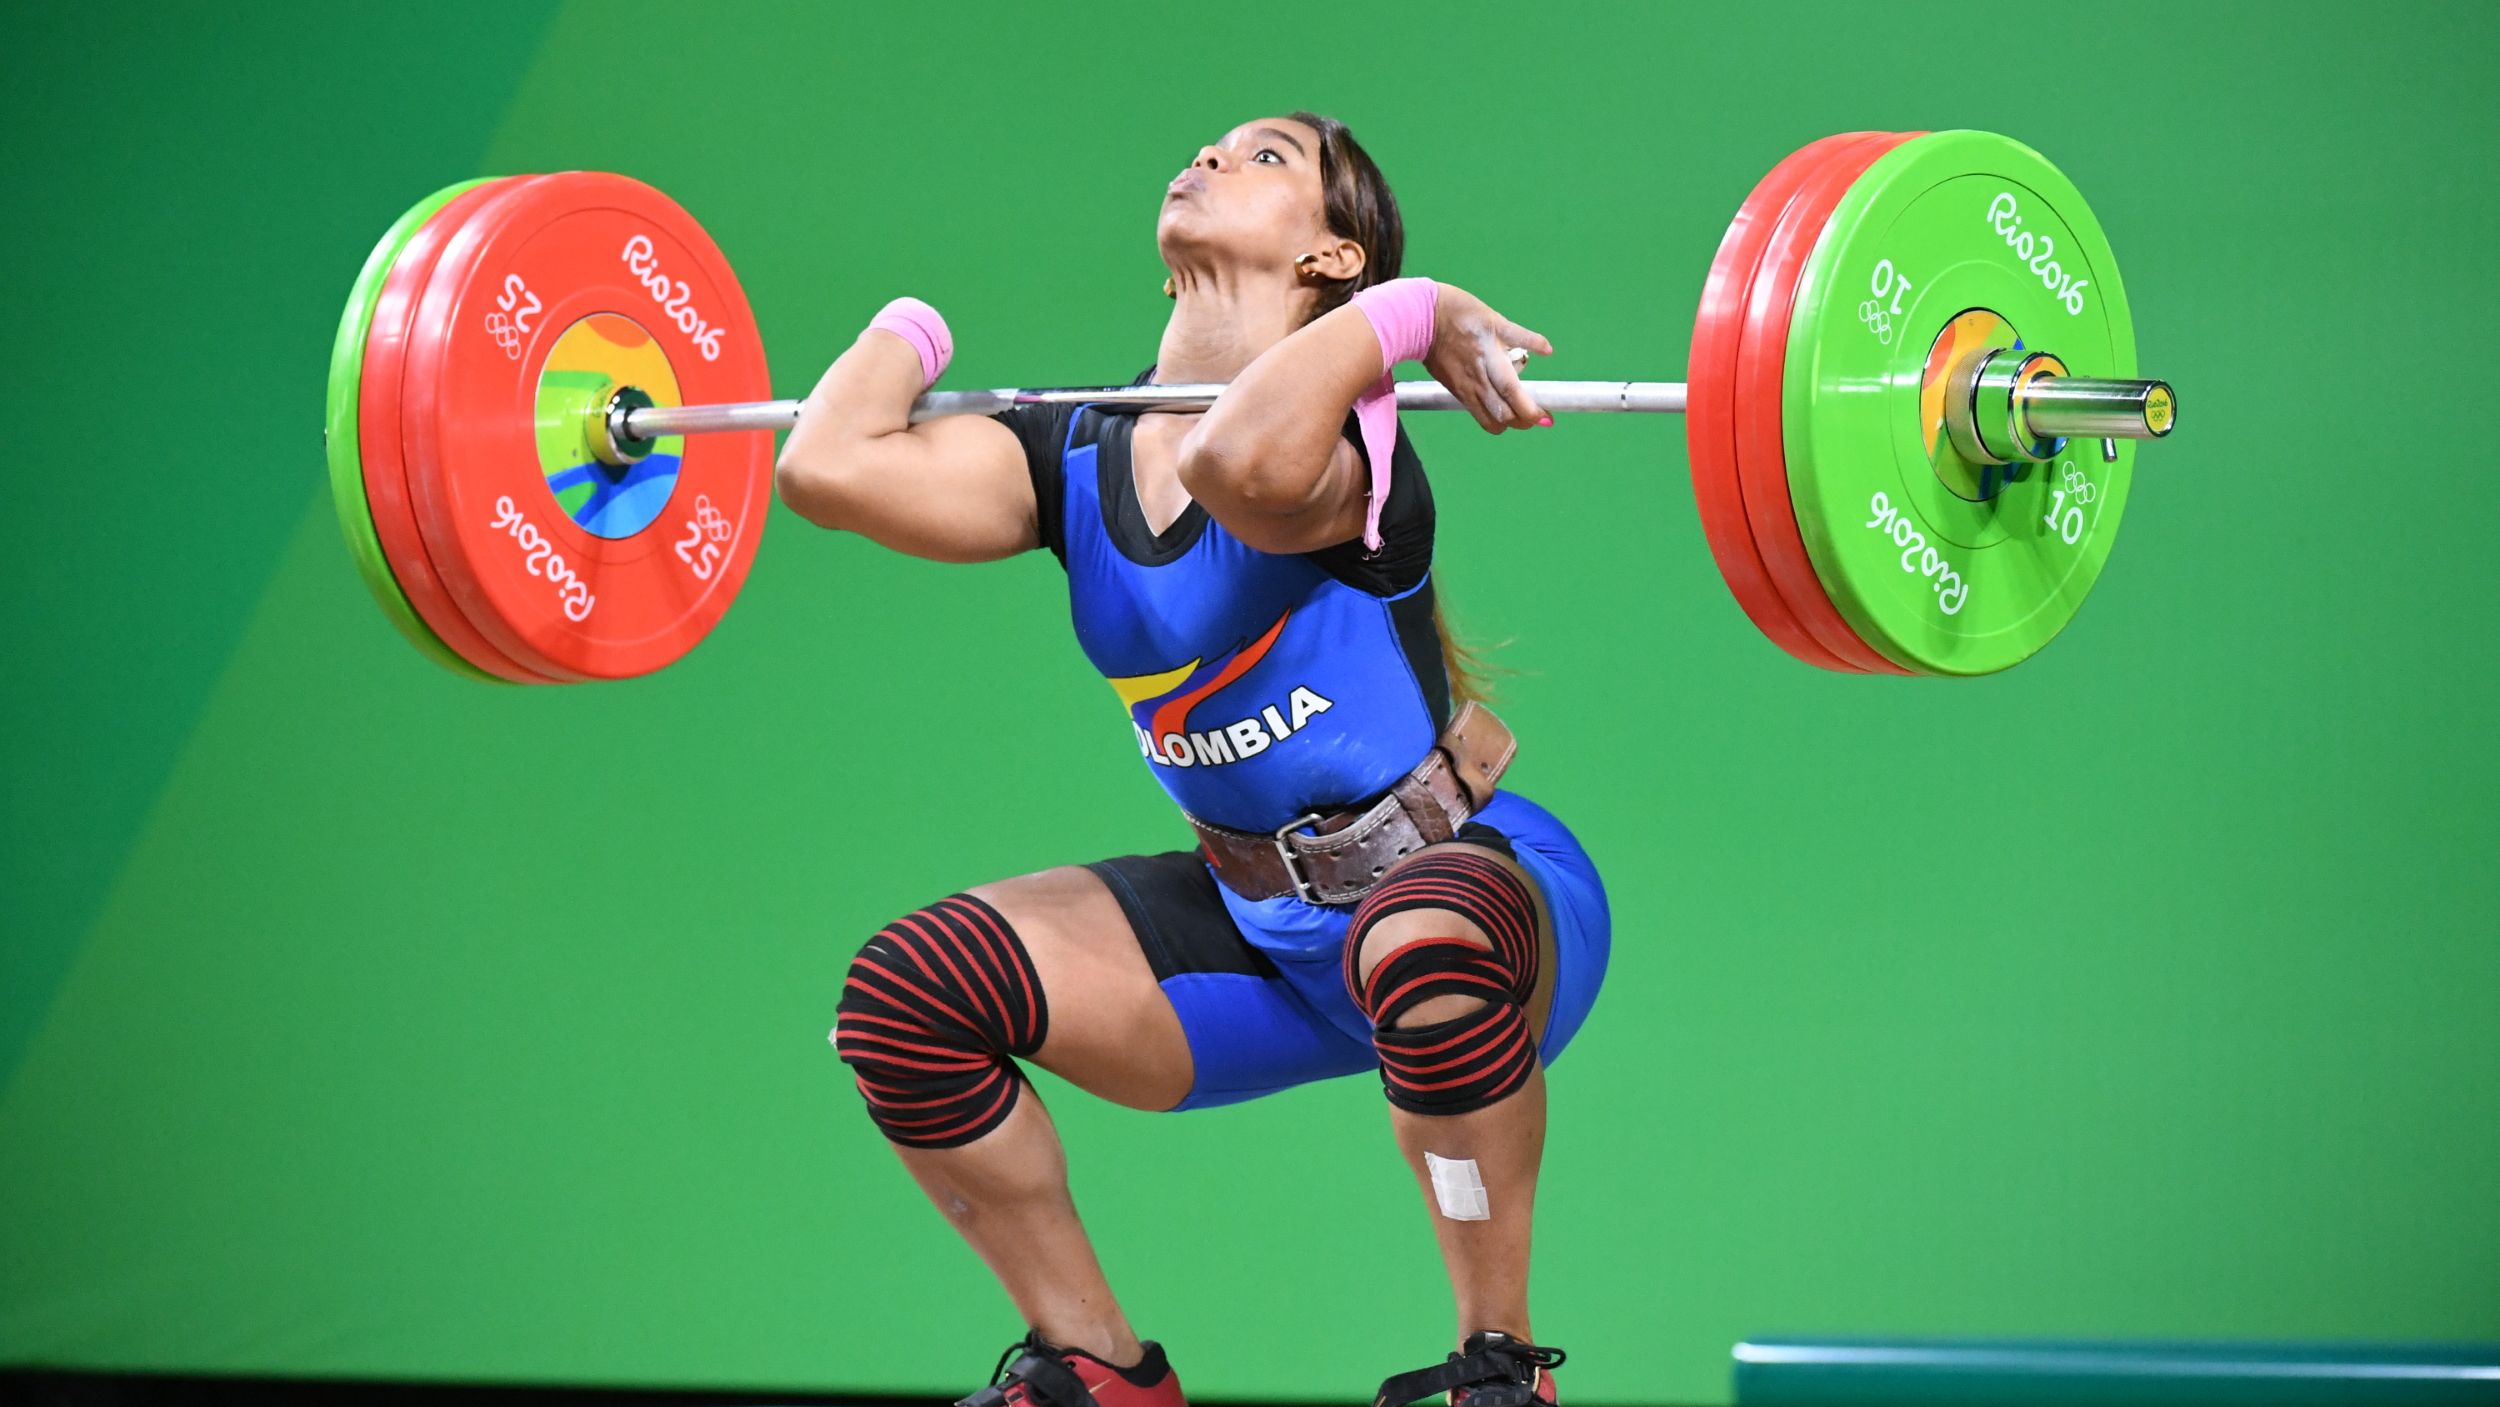 Weightlifting at the olympics